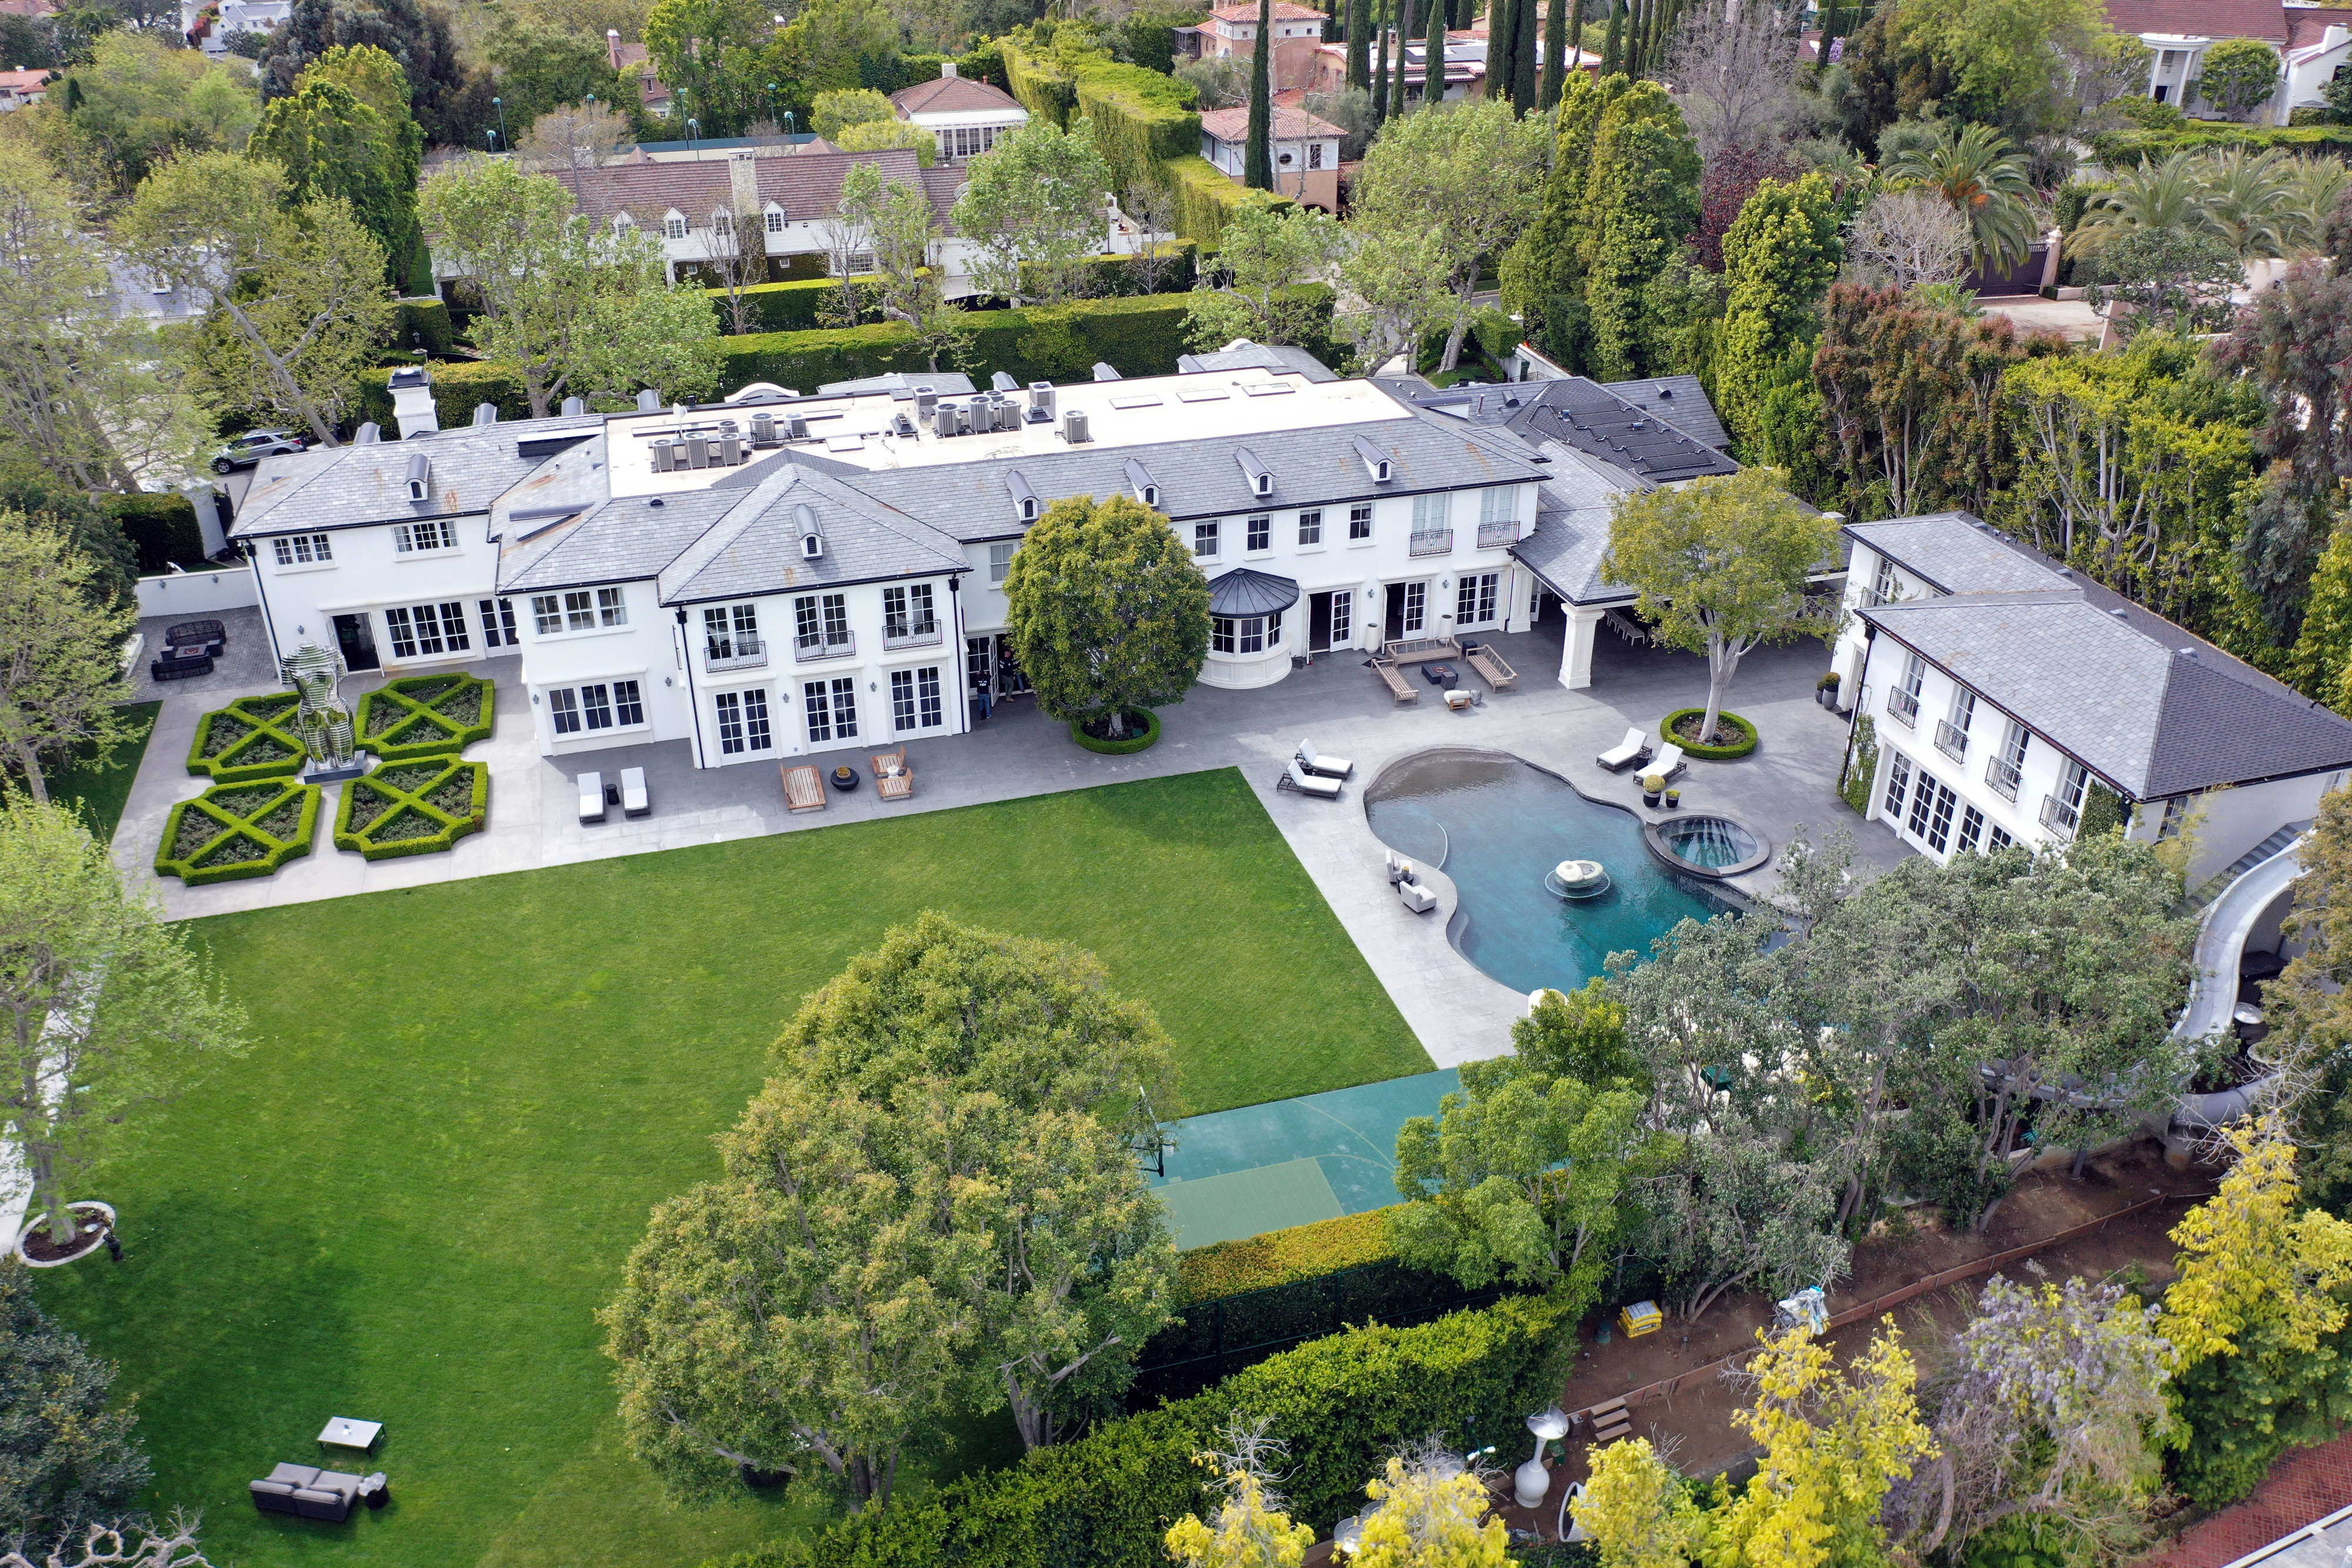 Aerial view of a large, luxurious estate with multiple buildings, landscaped gardens, and a swimming pool